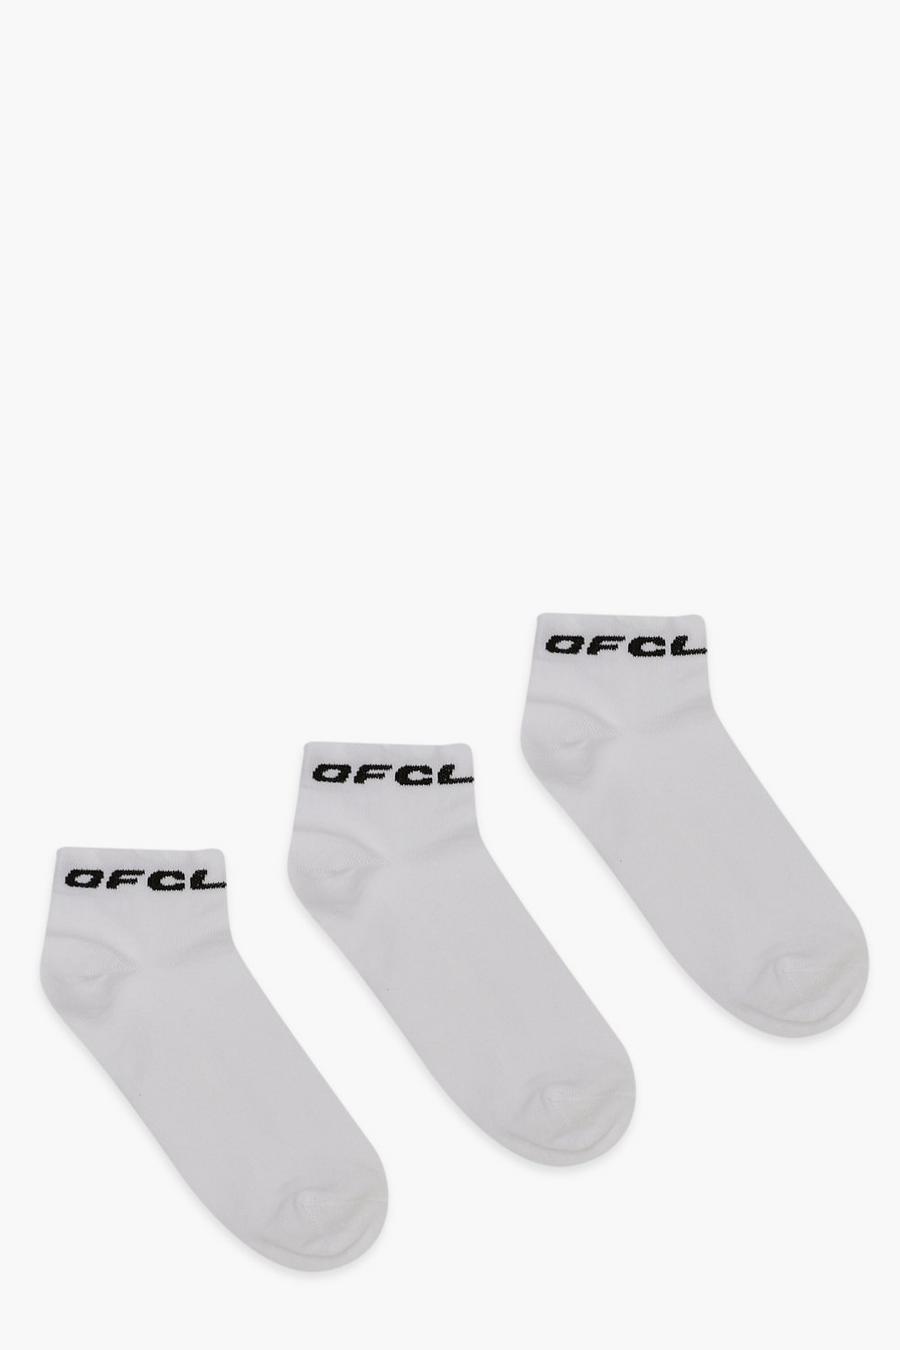 White Ofcl Branded Sneakers Socks 3 Pack image number 1